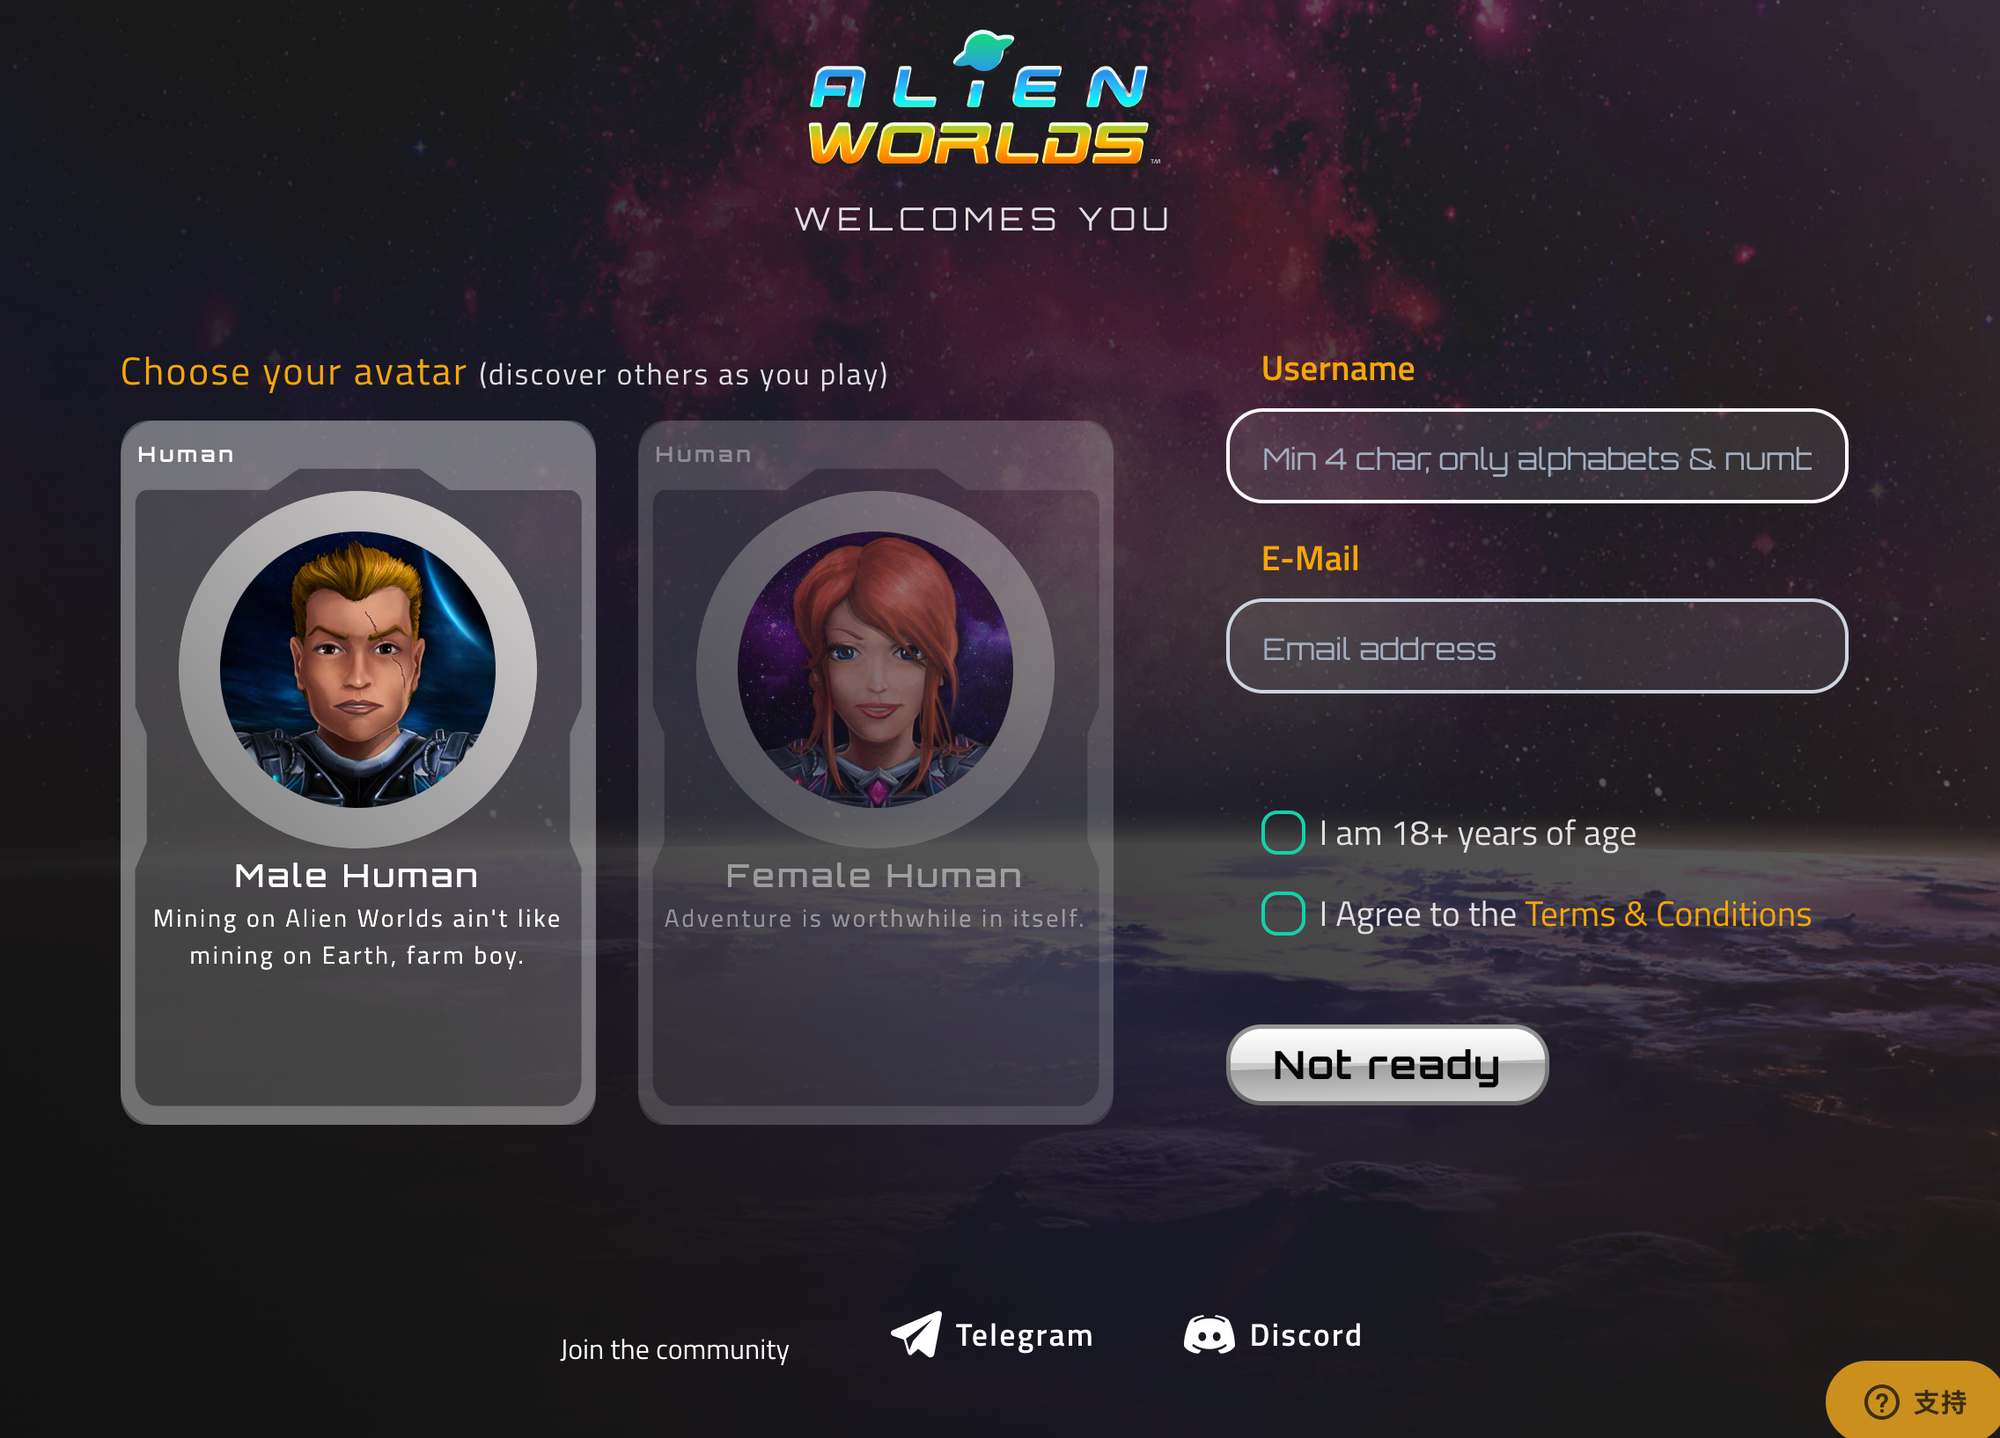 In Alien Worlds, players start by selecting a character and entering basic game information (name, email). 